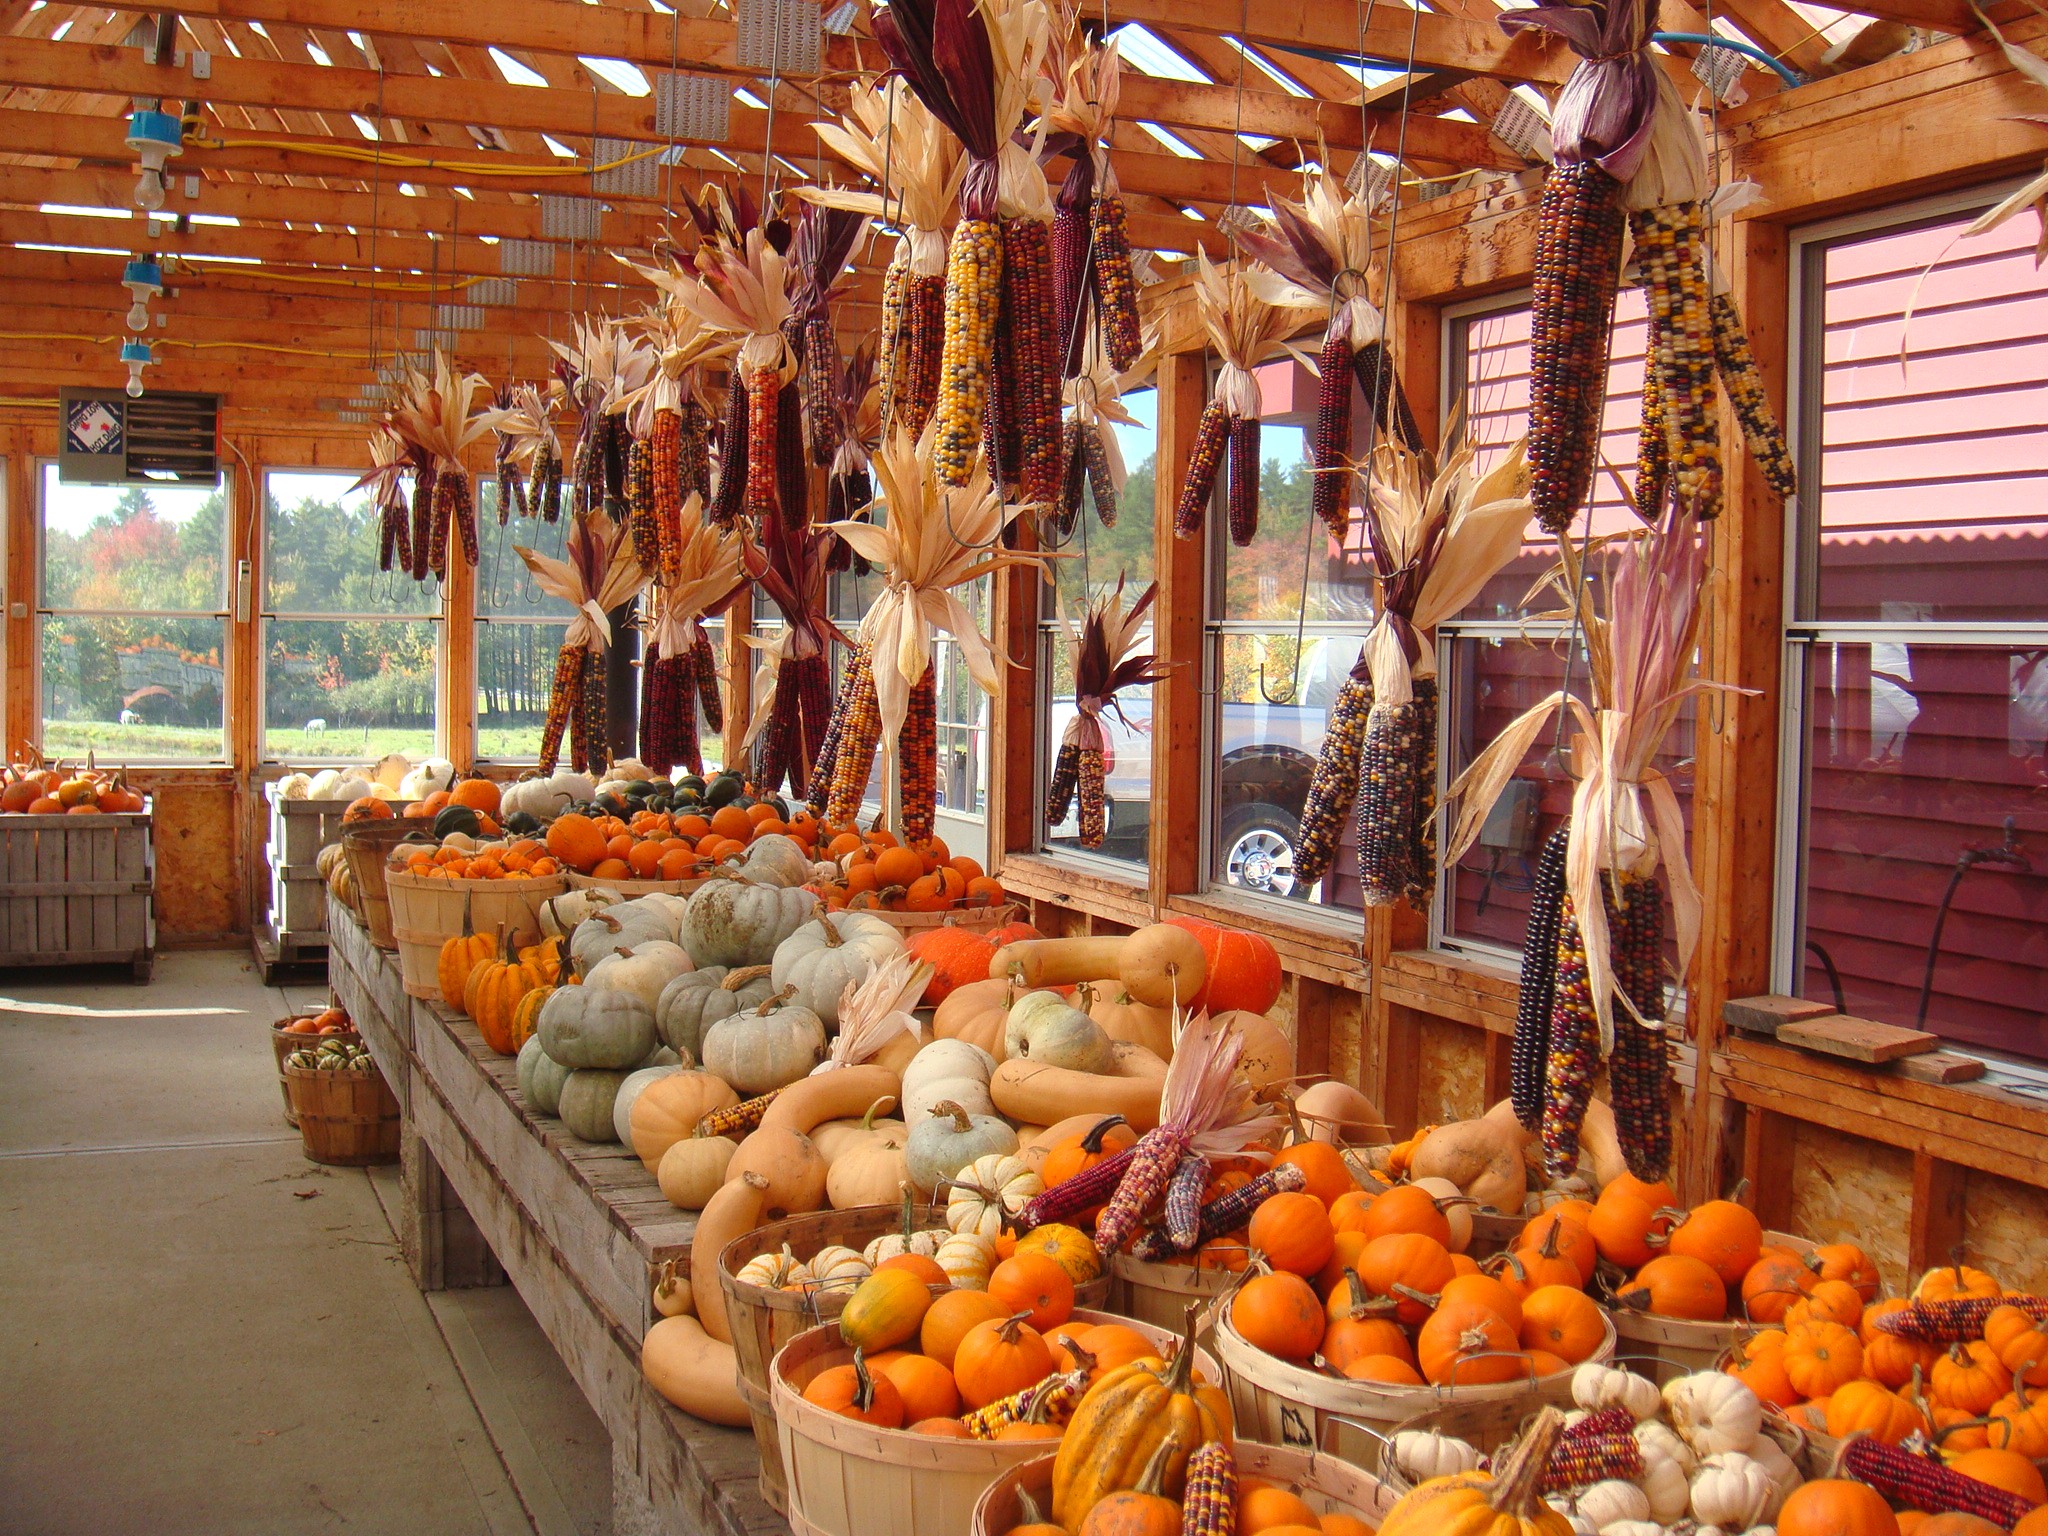 Produce Farm In The Fall (user submitted)